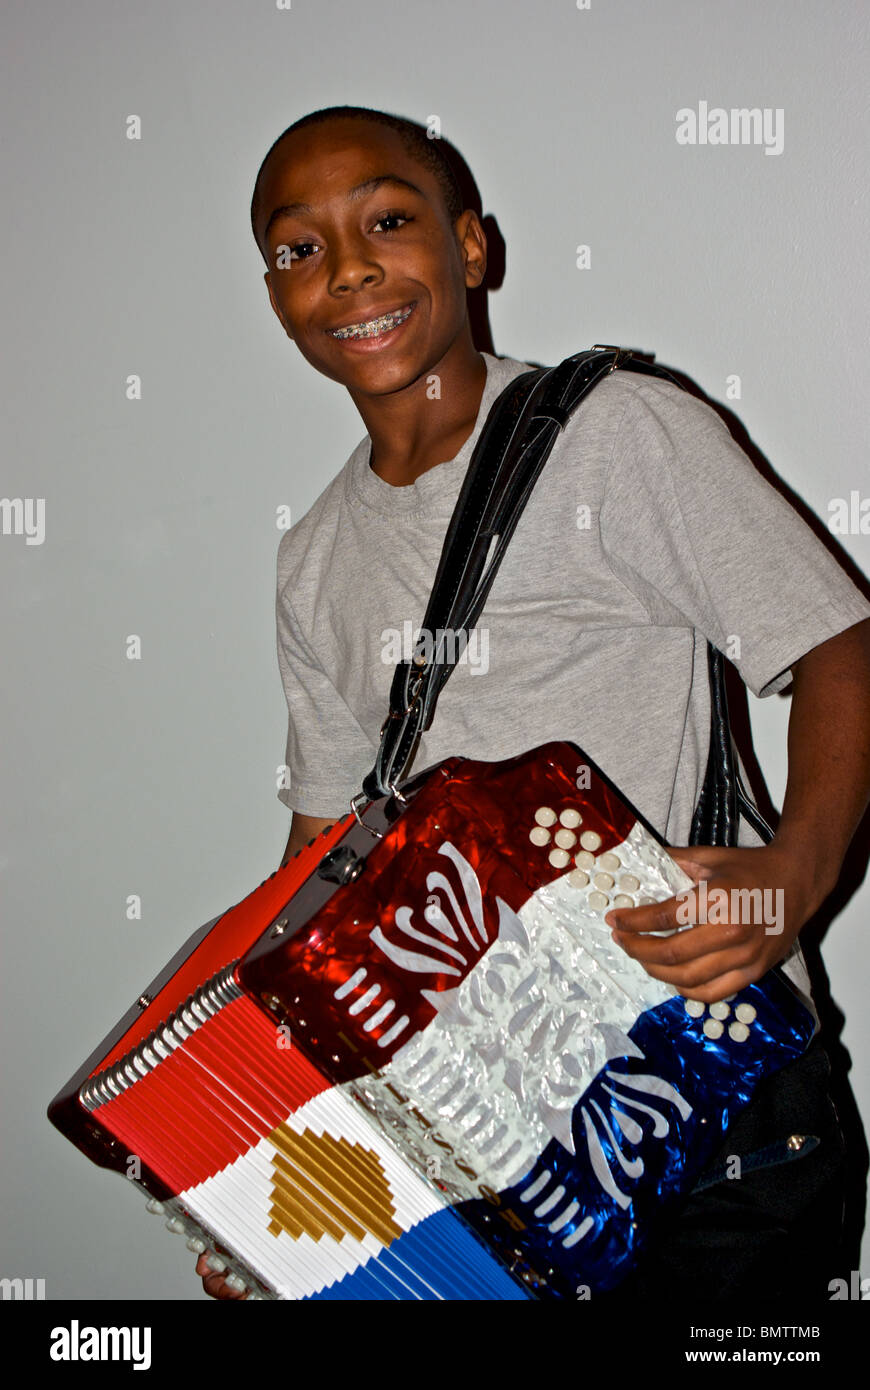 Guyland Ledet acclaimed young left-handed accordion player at Delta Grand Theater Opelousas LA Stock Photo